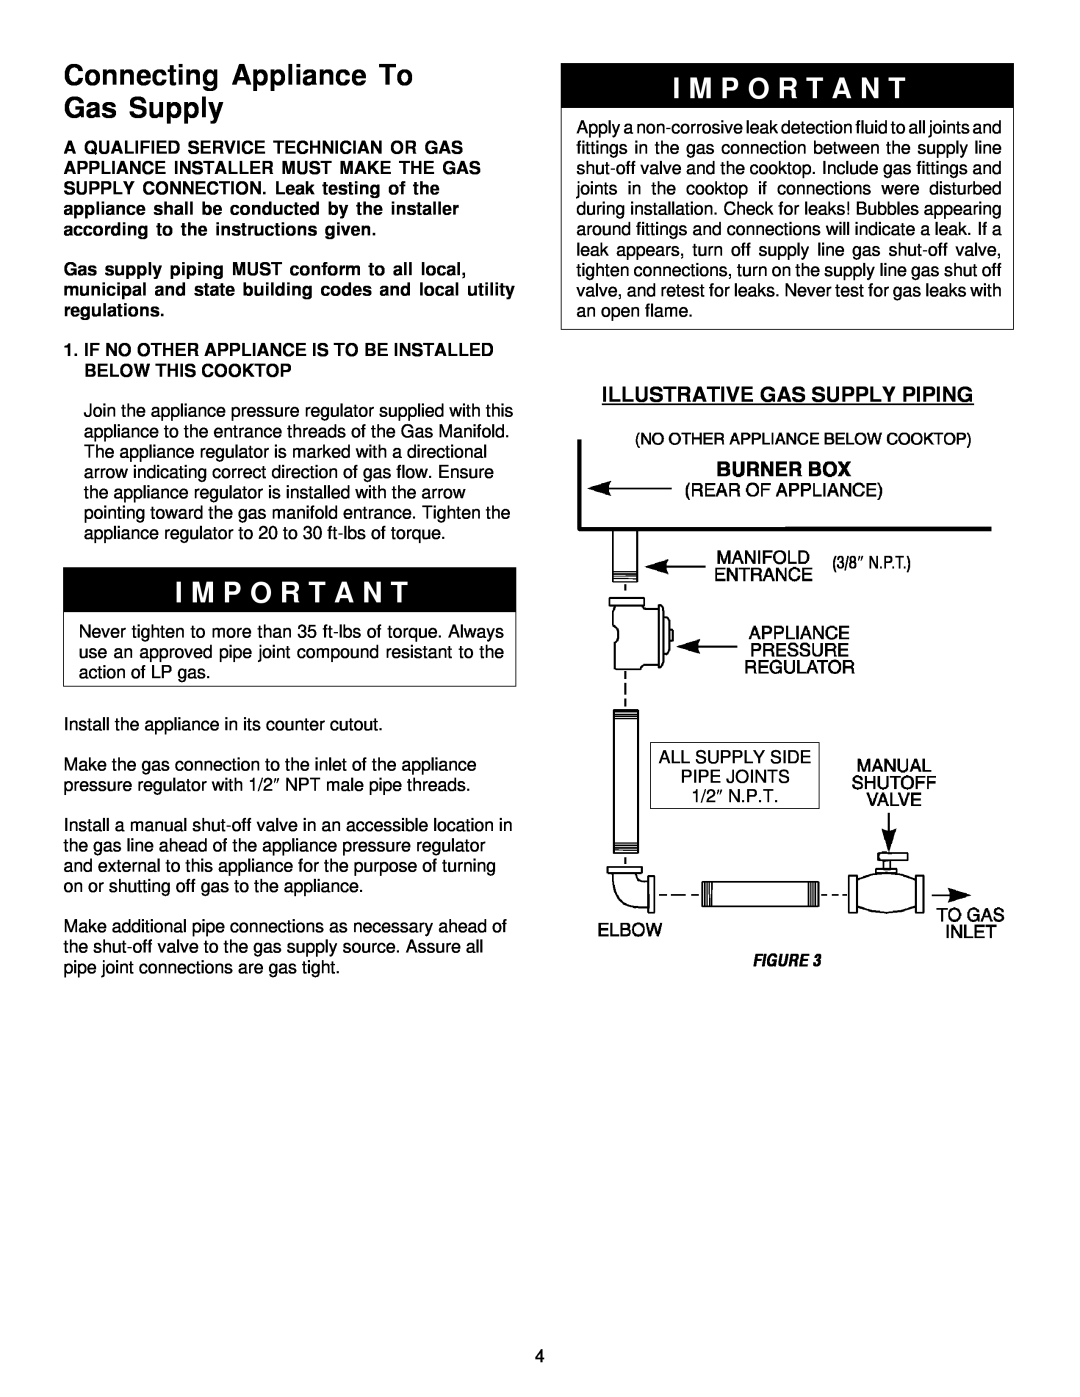 Maytag MGC5536 installation manual Connecting Appliance To Gas Supply, I M P O R T A N T, Illustrative Gas Supply Piping 